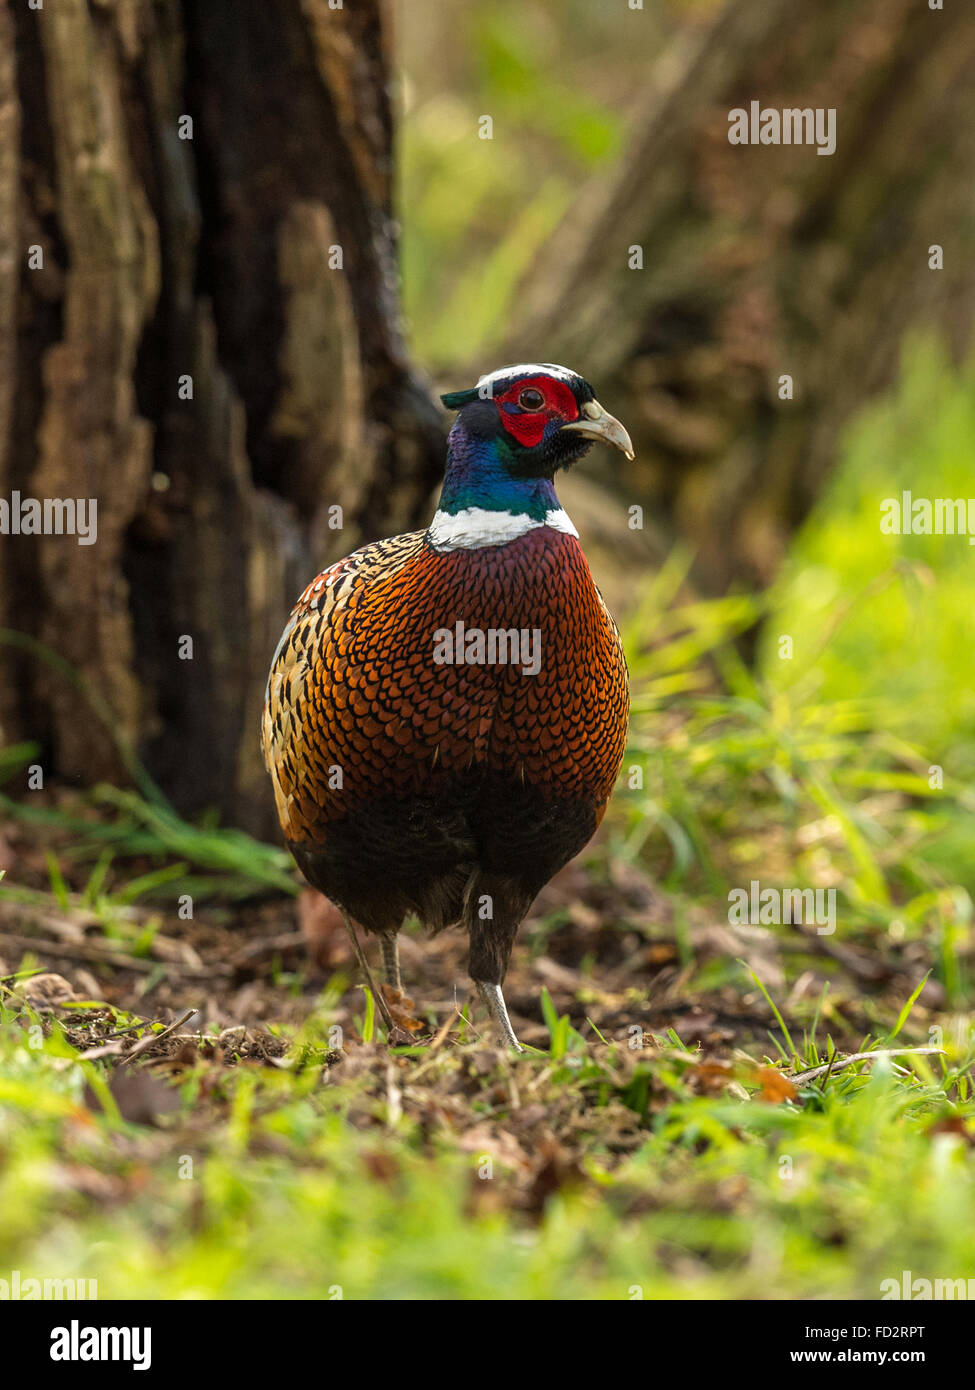 Beautiful Male Ring-necked Pheasant (Phasianus colchicus) foraging in natural woodland forest setting. Full, facing front. Stock Photo